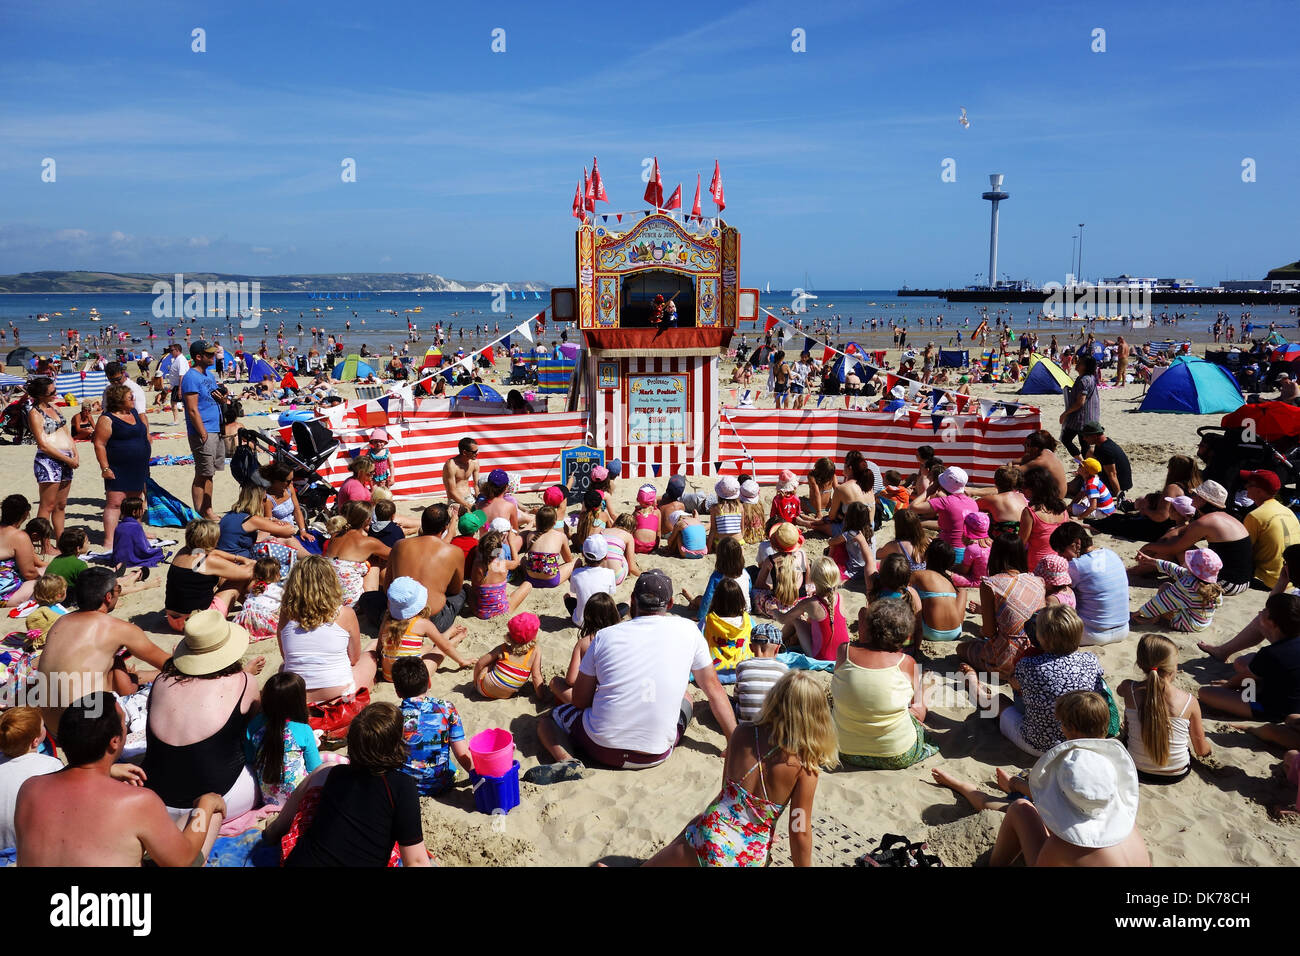 http://c8.alamy.com/comp/DK78CH/punch-and-judy-show-on-weymouth-beach-in-dorset-england-uk-traditional-DK78CH.jpg